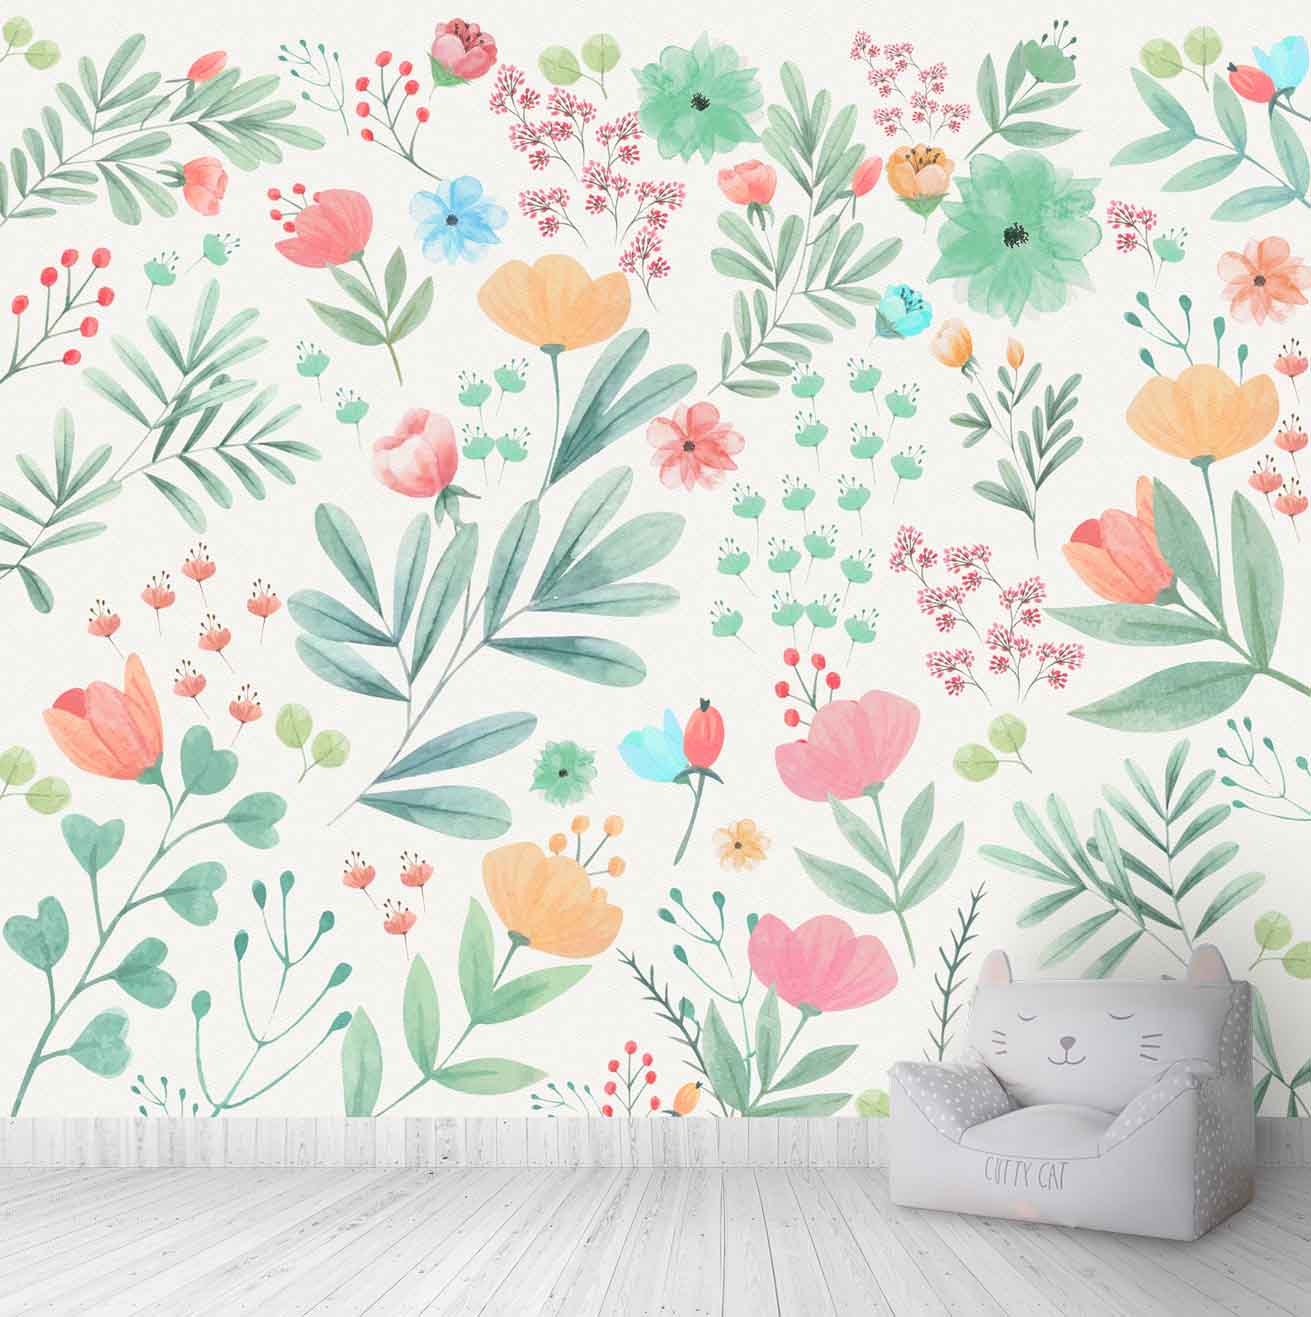 Water Painted Floral Design, Wall Mural for Kids Room